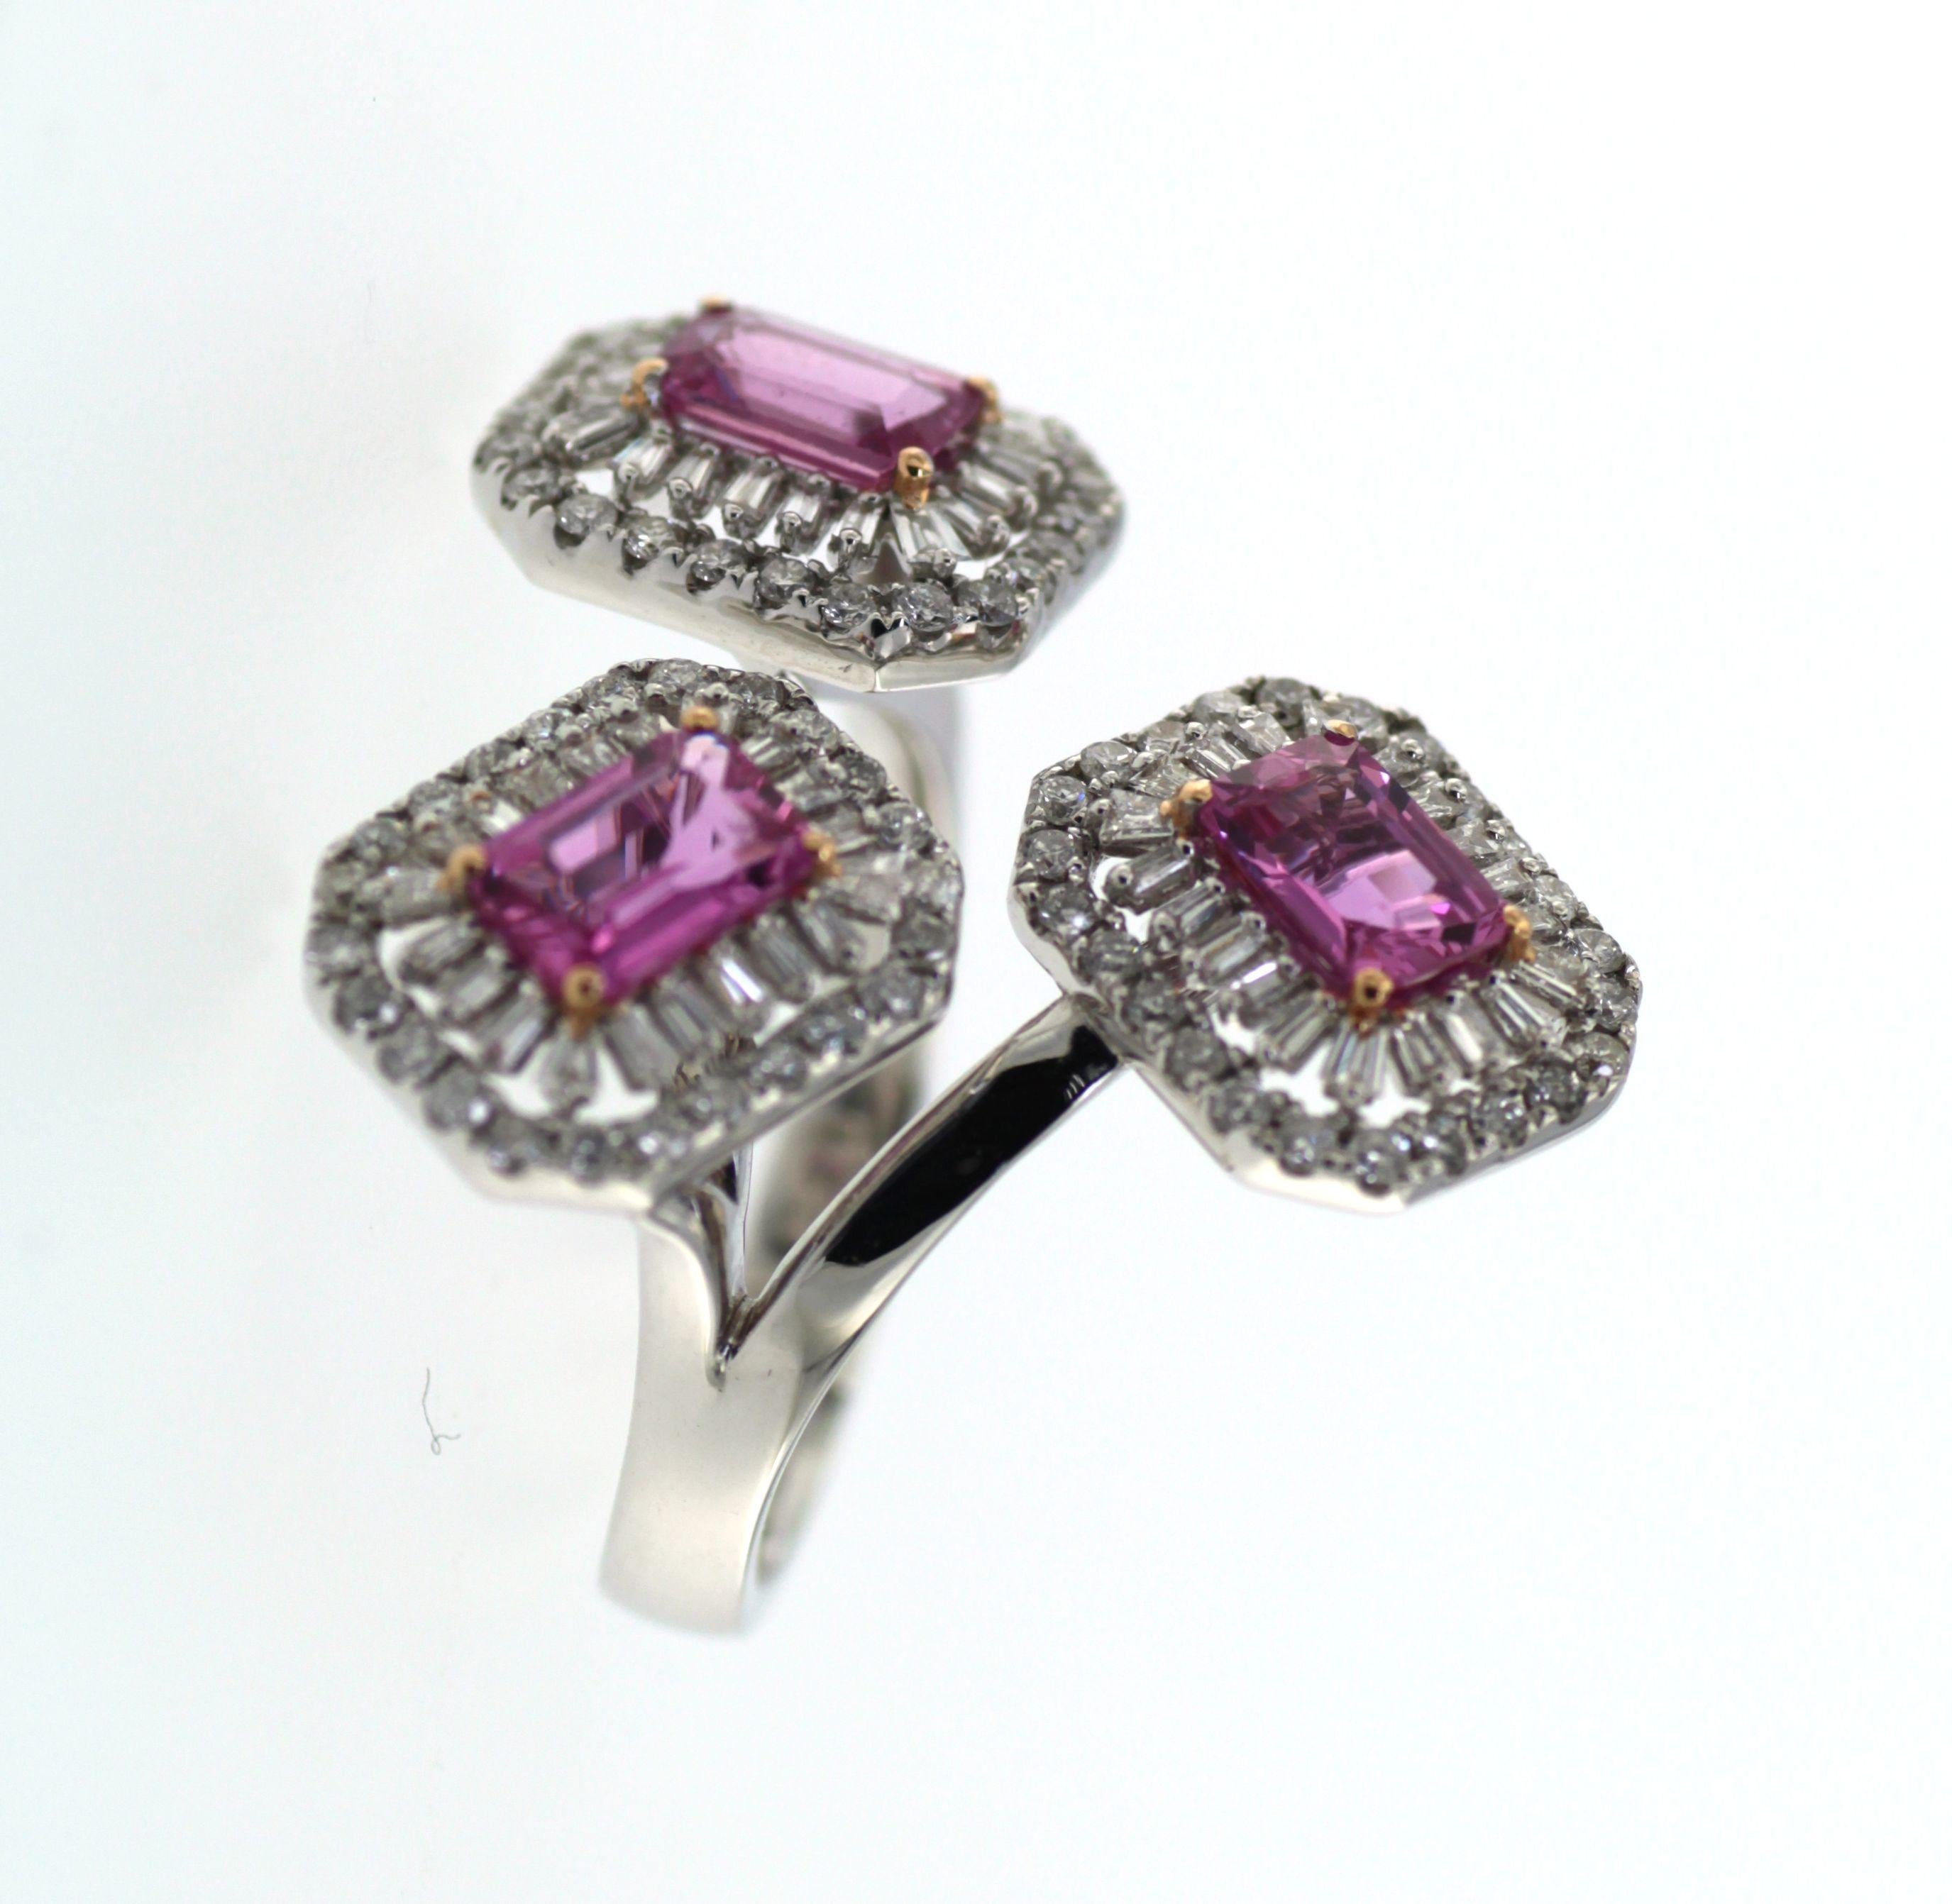 Elegance meets timeless sophistication in this remarkable ring, which harmoniously blends the allure of rare gemstones with the resplendence of precious metal. Anchoring the design are three captivating Pink Sapphires, cumulatively weighing 1.84